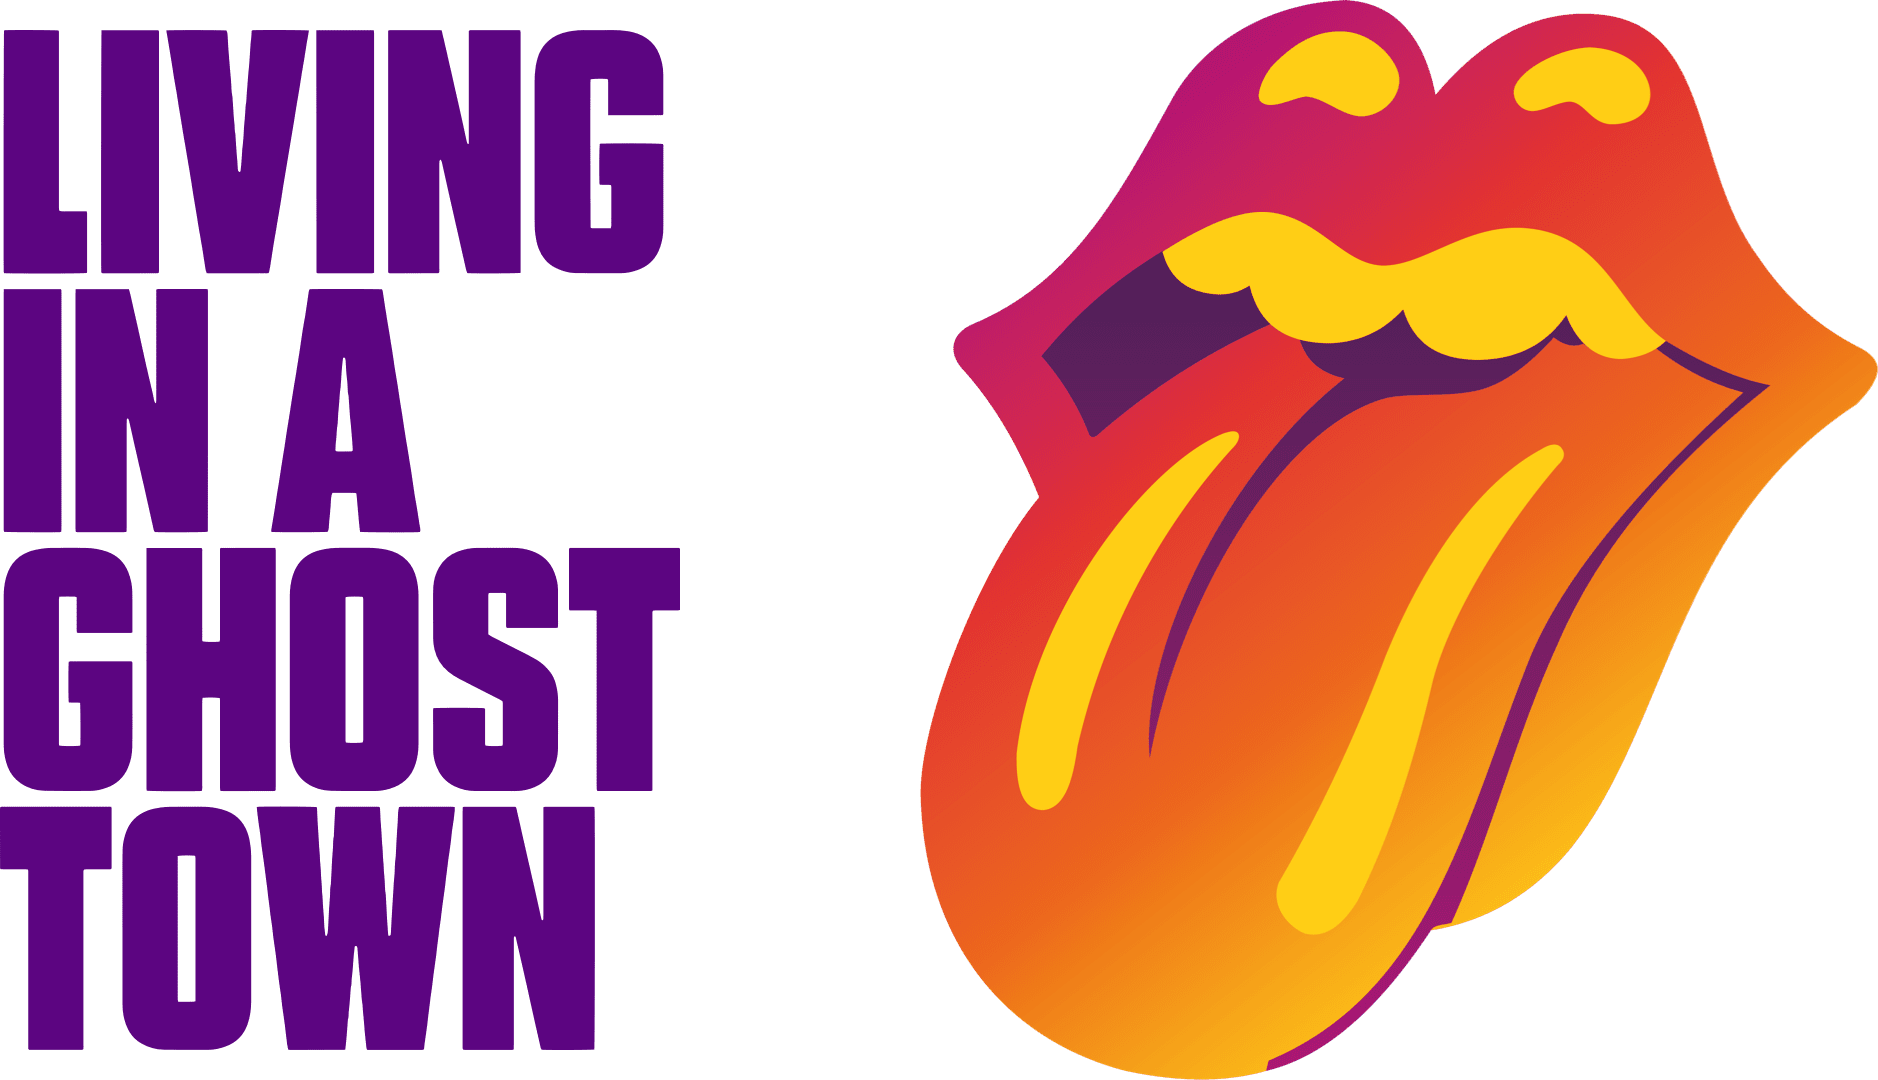 rolling stones ghost city